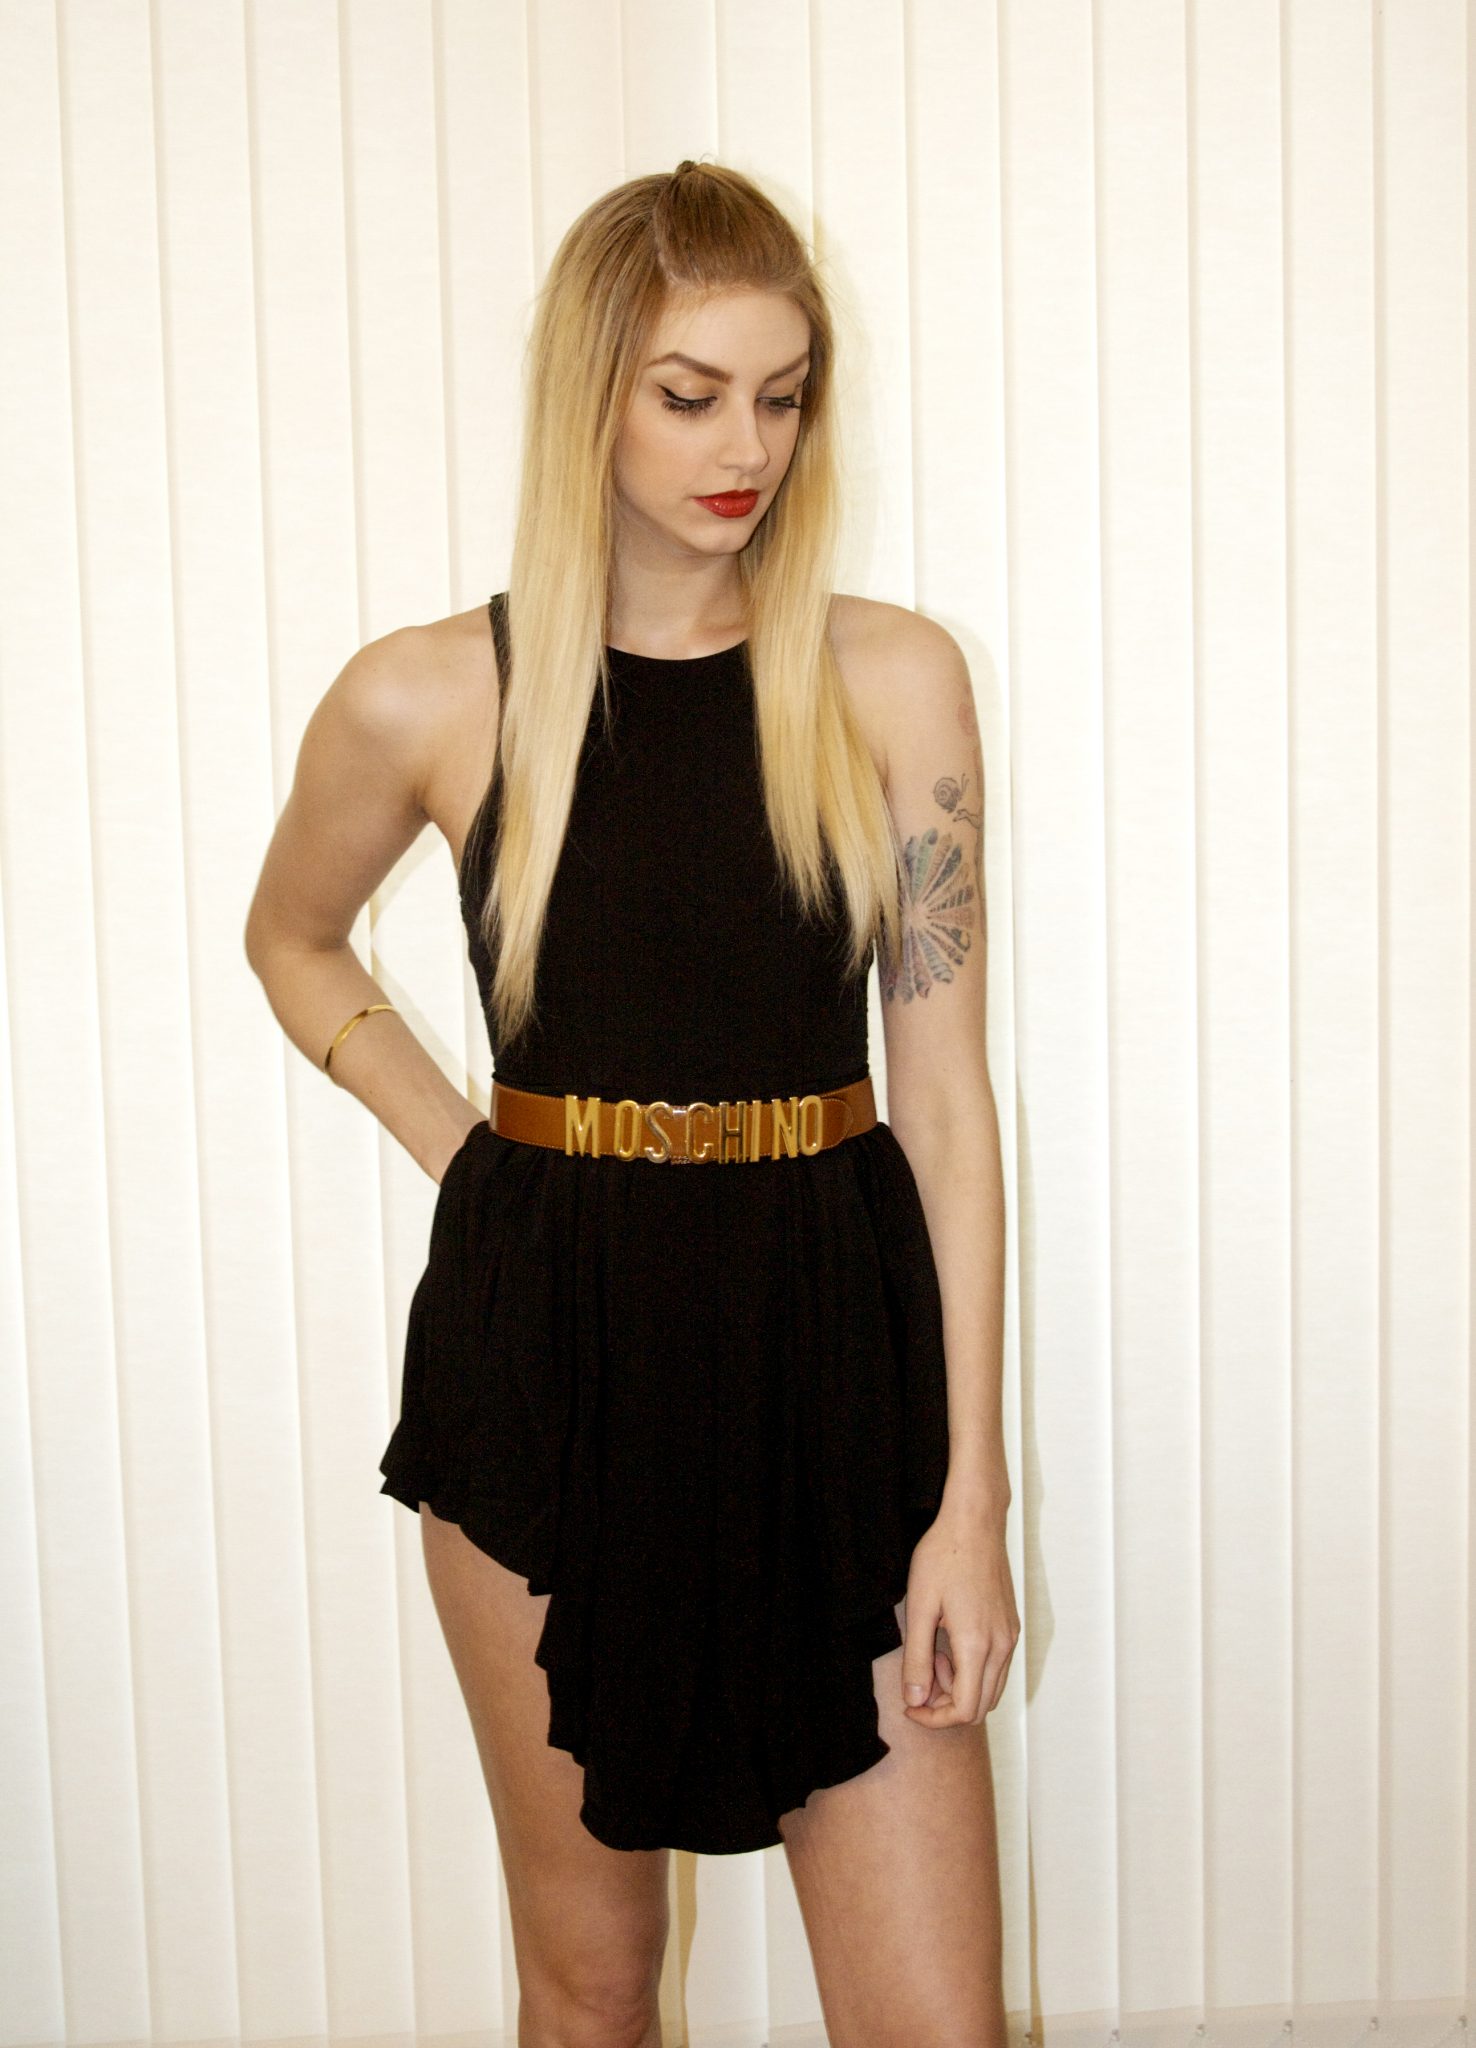 Manchester based fashion and lifestyle blogger. Whitefox boutique black waterfall playsuit, Moschino belt, New look shoes, toni and guy blonde, tattoos.